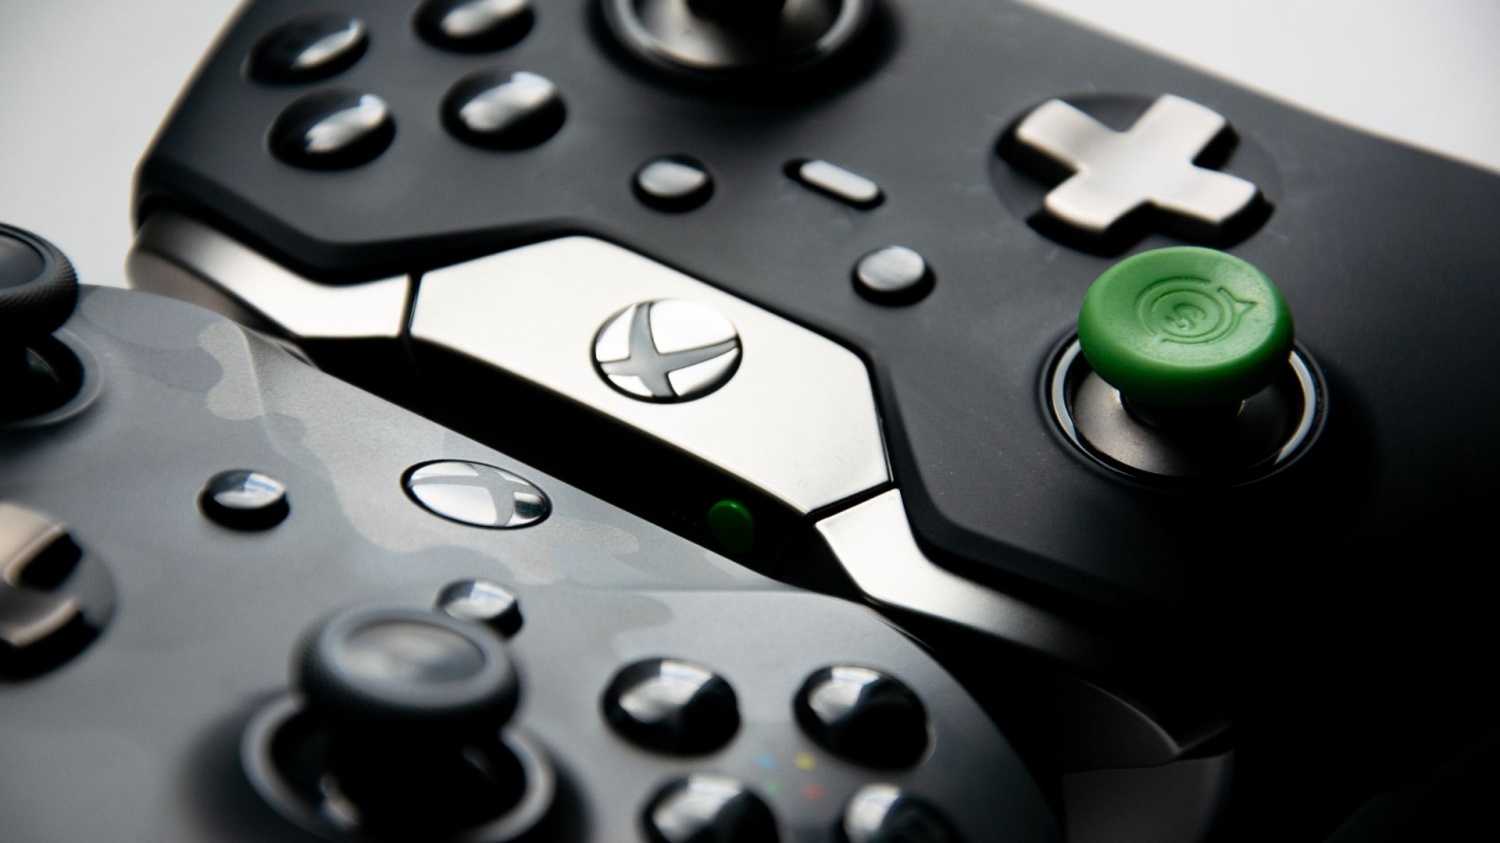 Easily Connect Your Xbox One Controller to Your New Xbox Series X or S With This Simple Guide